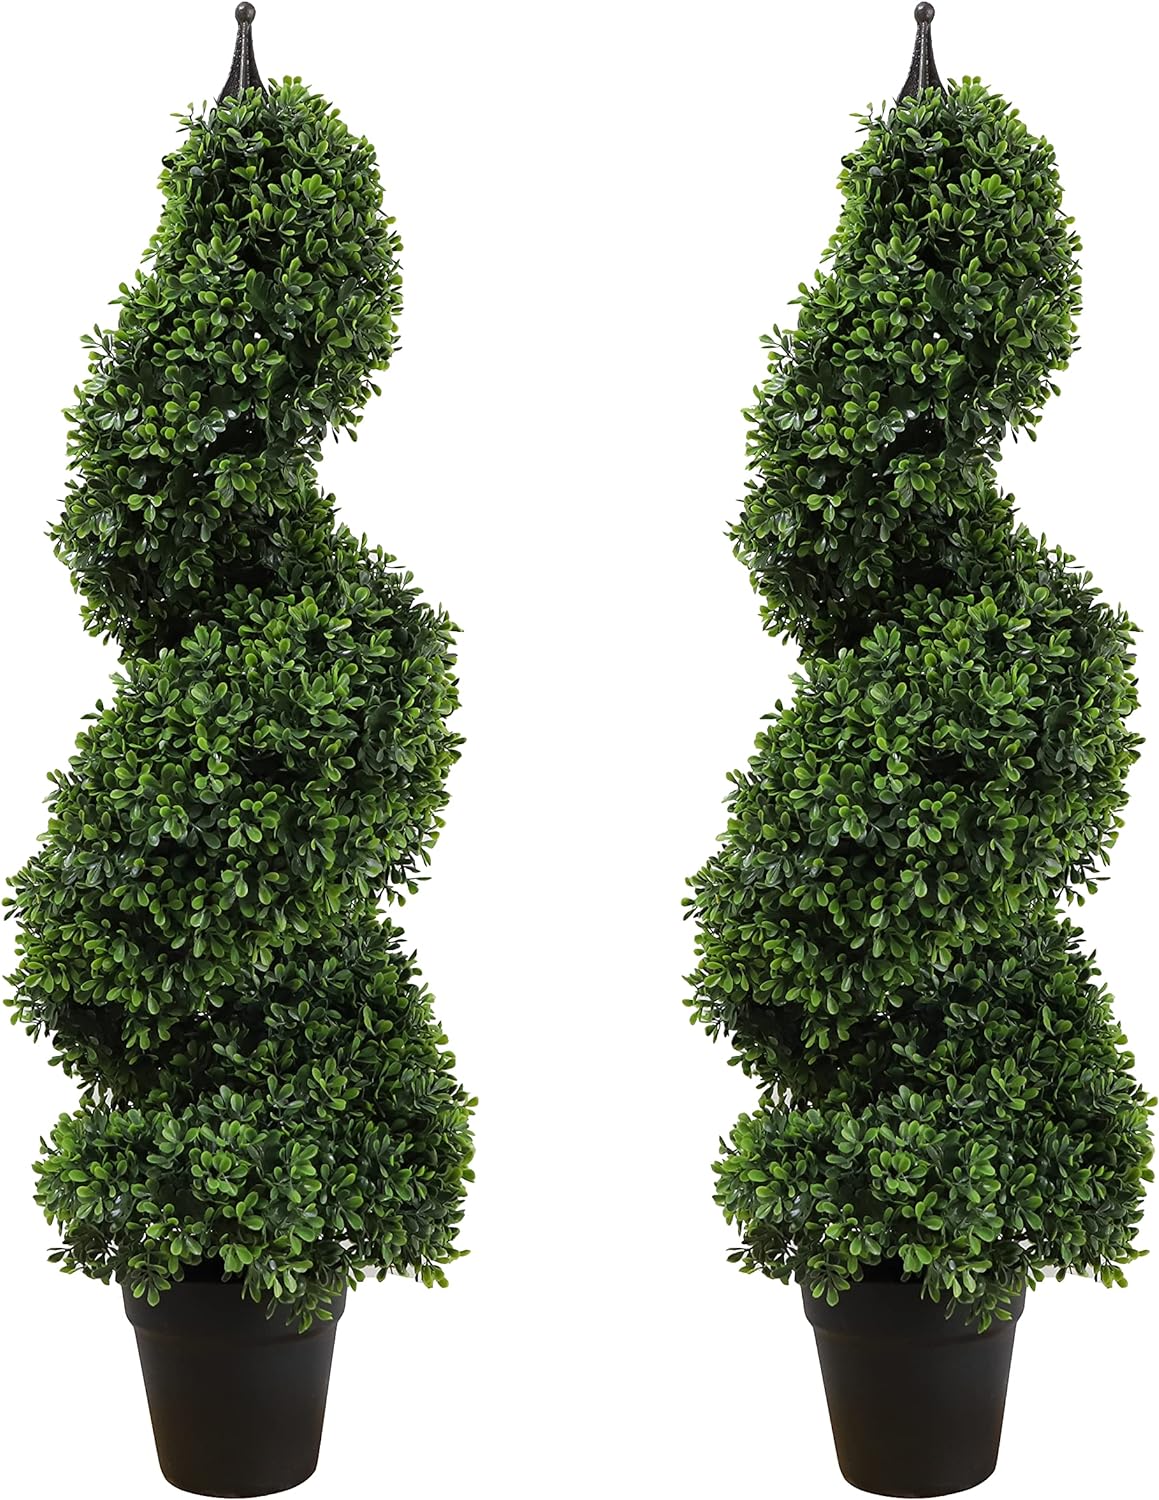 Momoplant Artificial Boxwood Spiral Topiary Tree 3ft (2 Pieces) Faux Topiary Tree Outdoor Faux Potted Tree，35 inch Feaux topiaries Trees